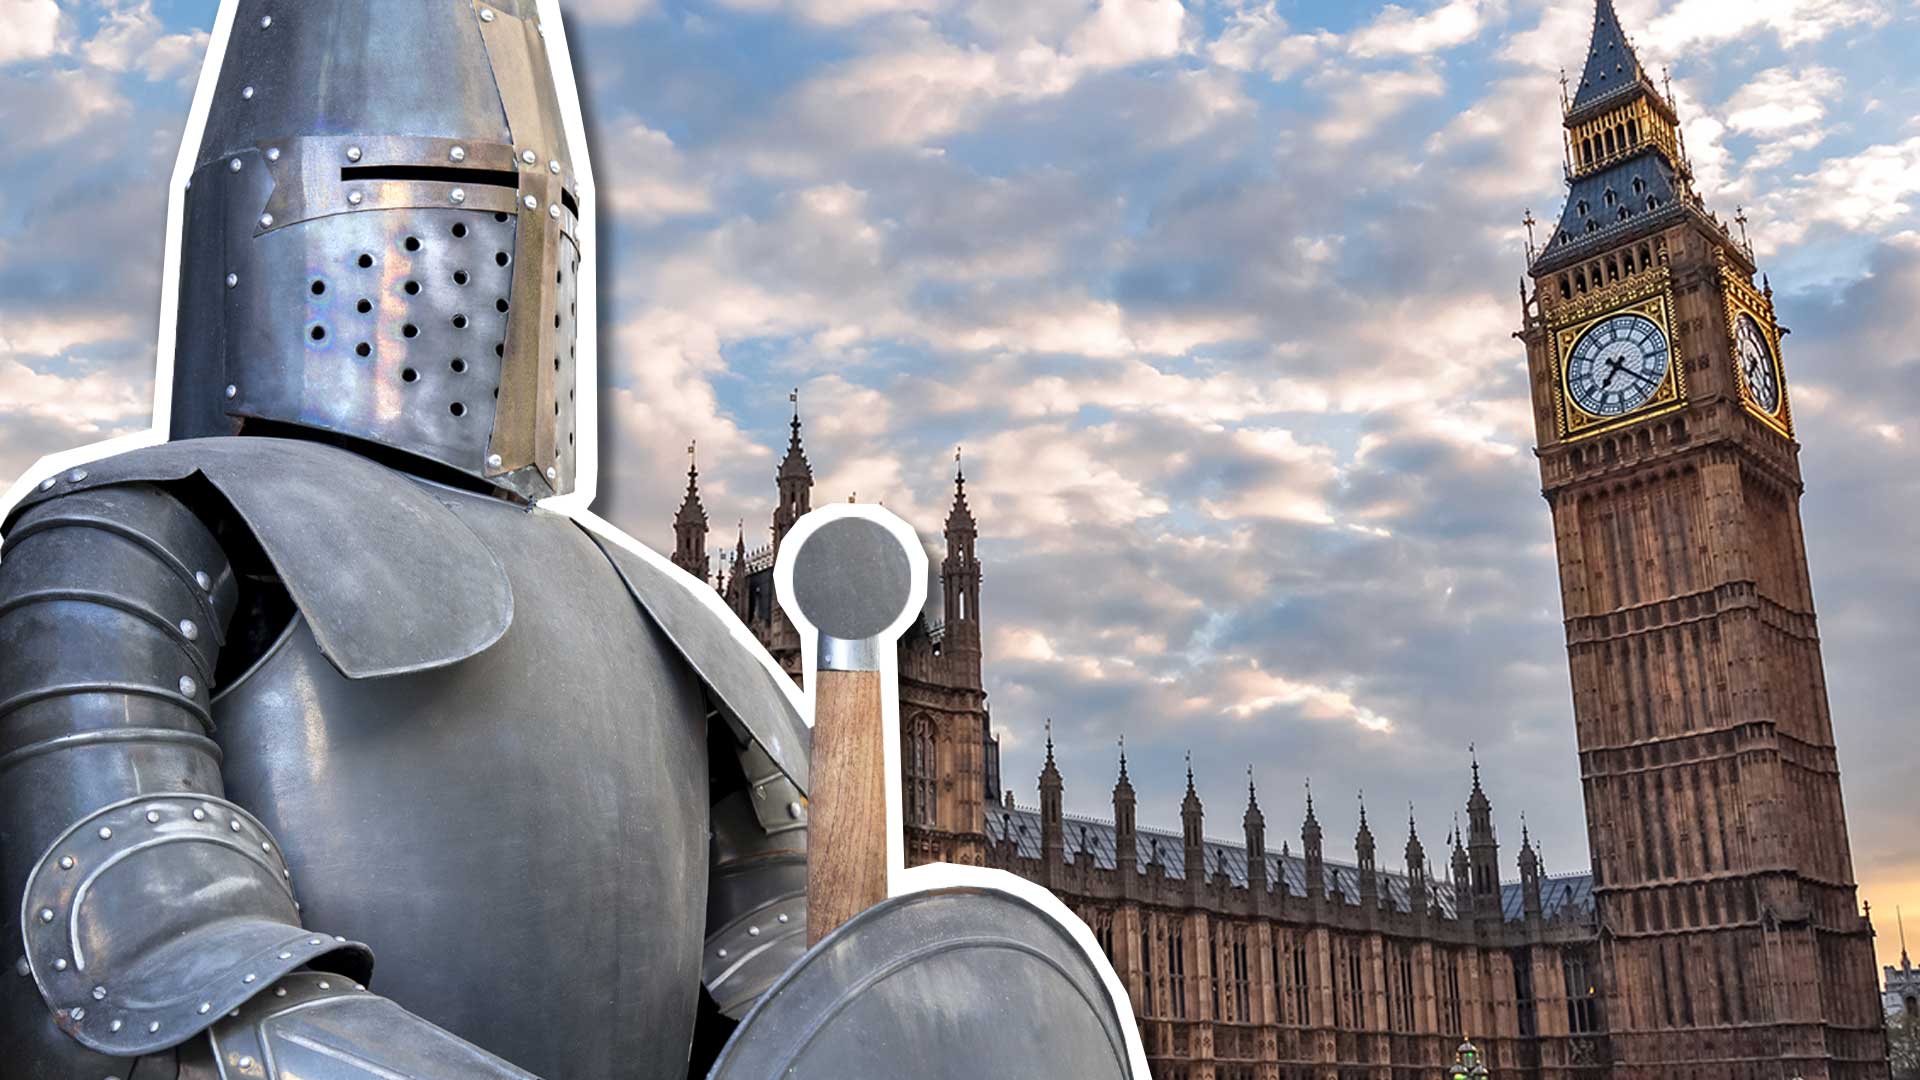 A knight outside the Houses of Parliament